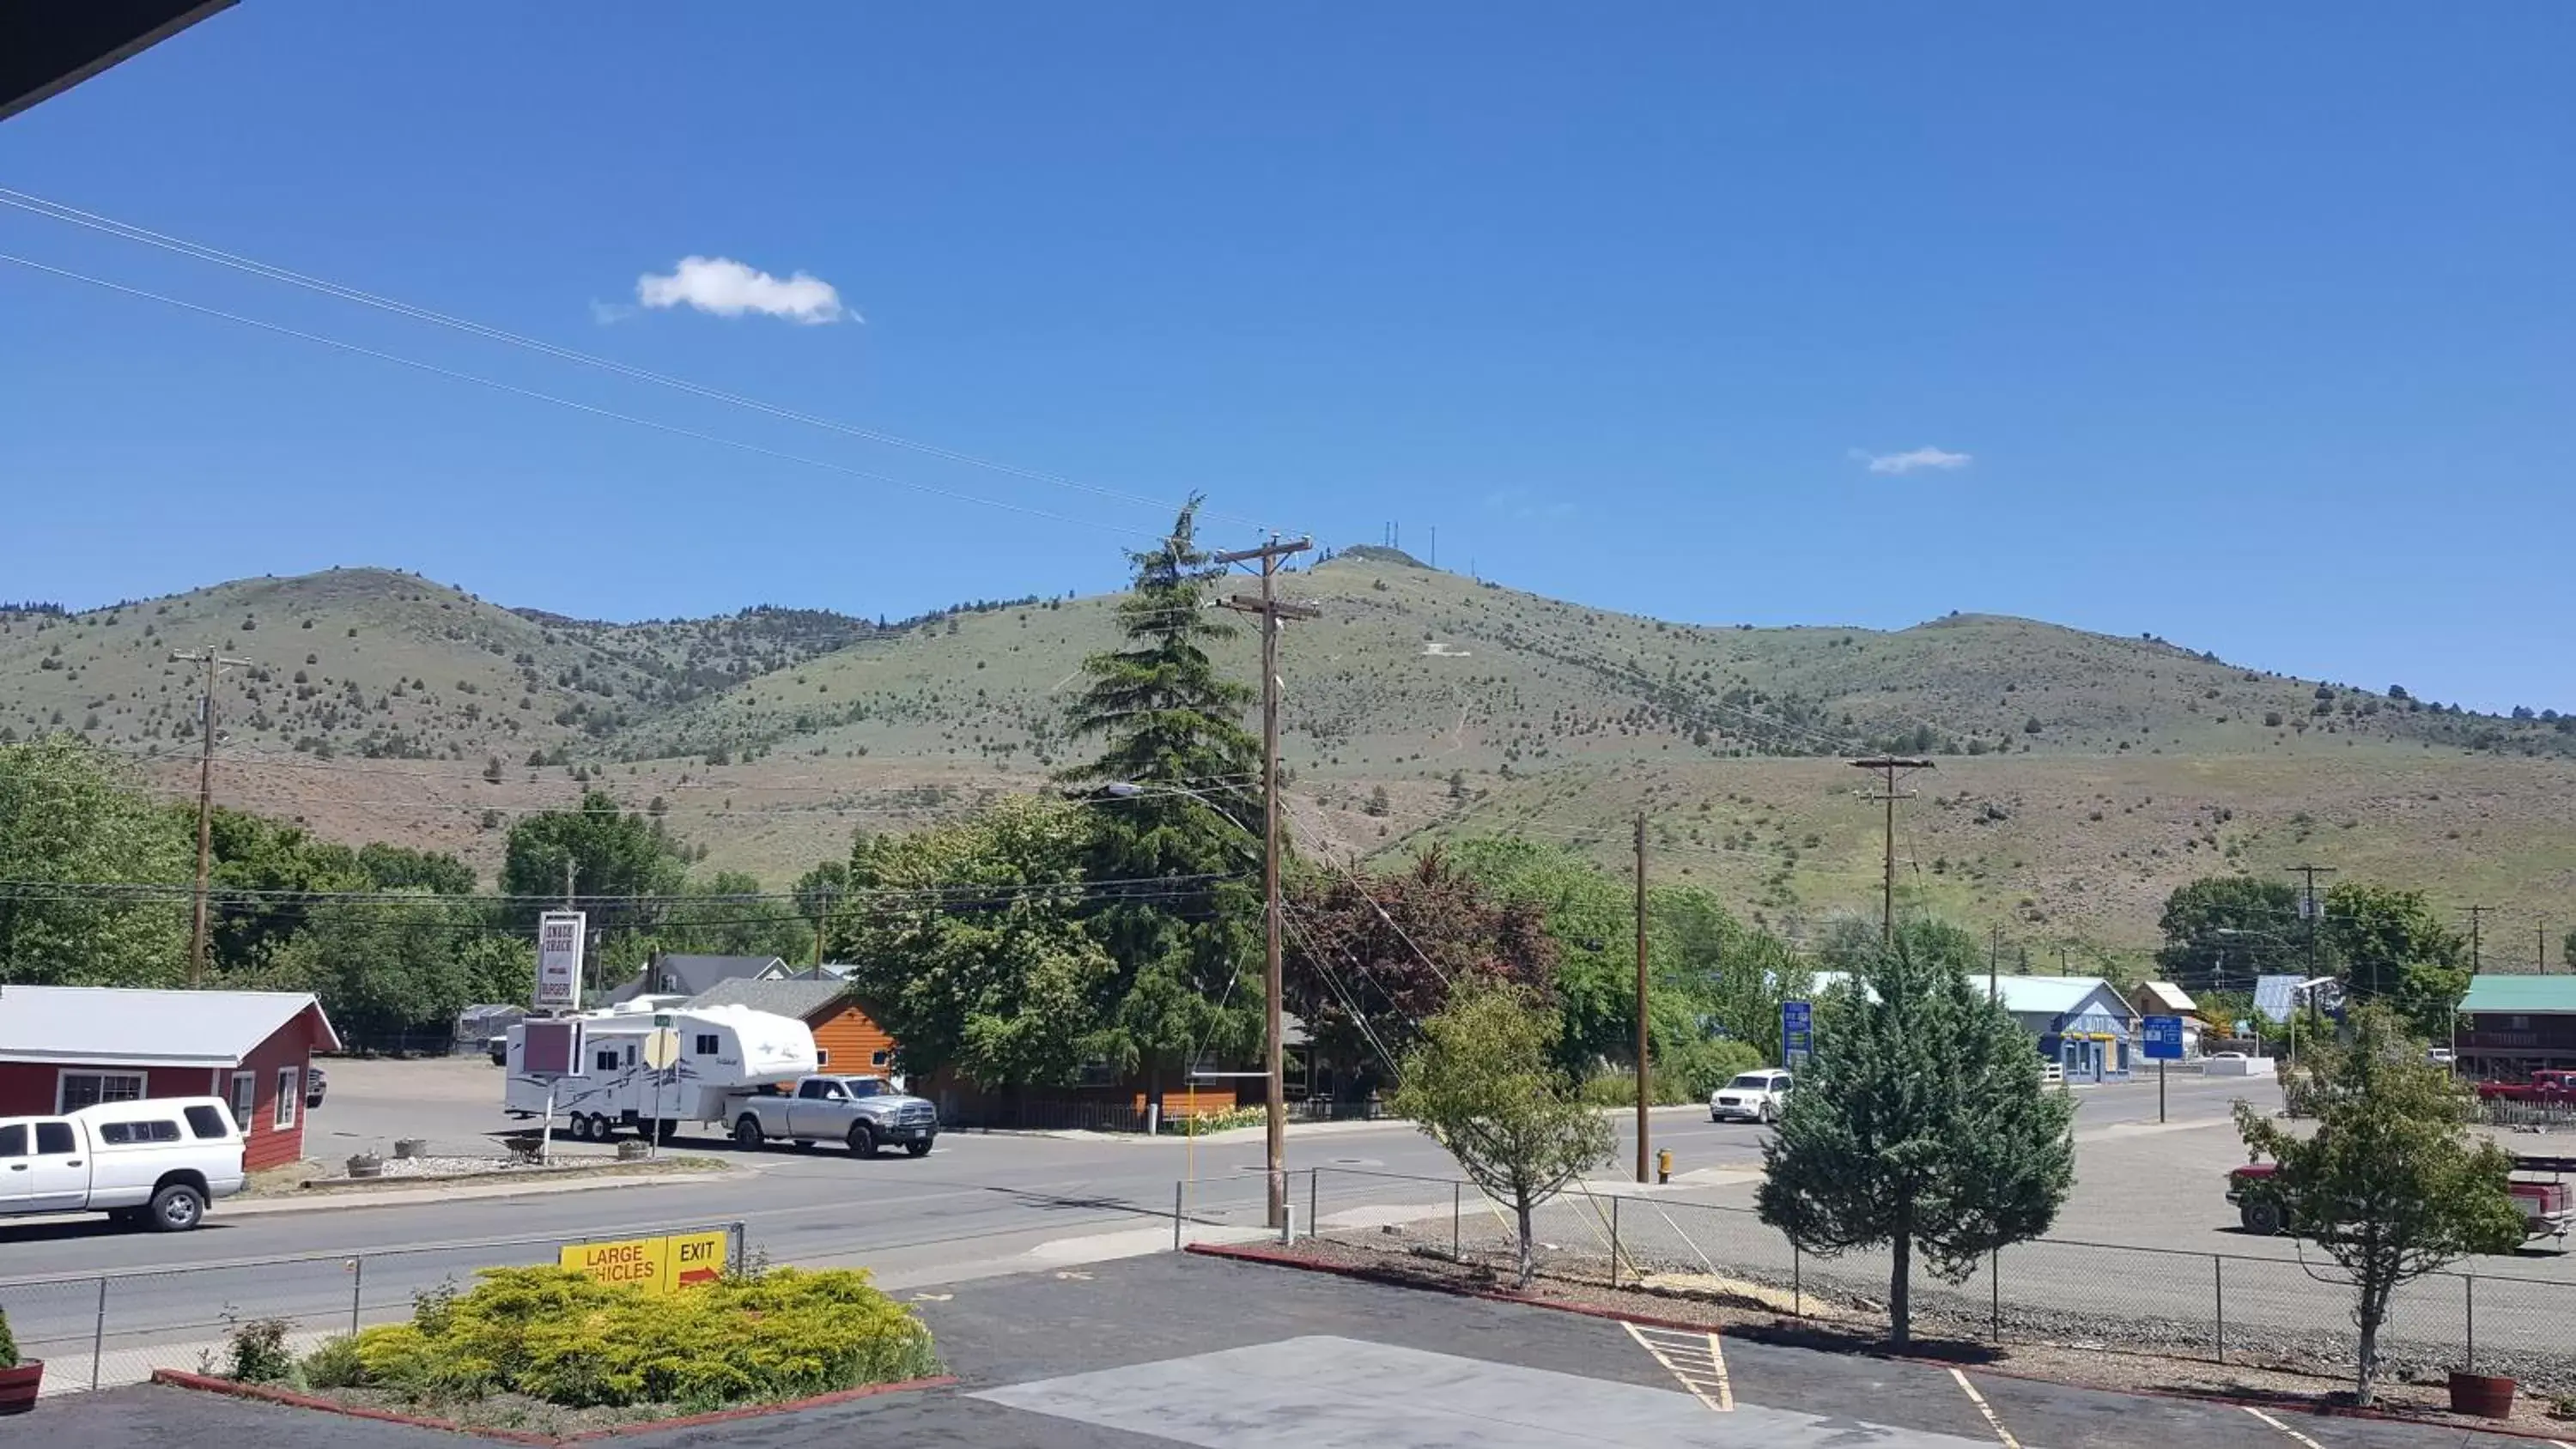 Mountain View in Interstate 8 Motel